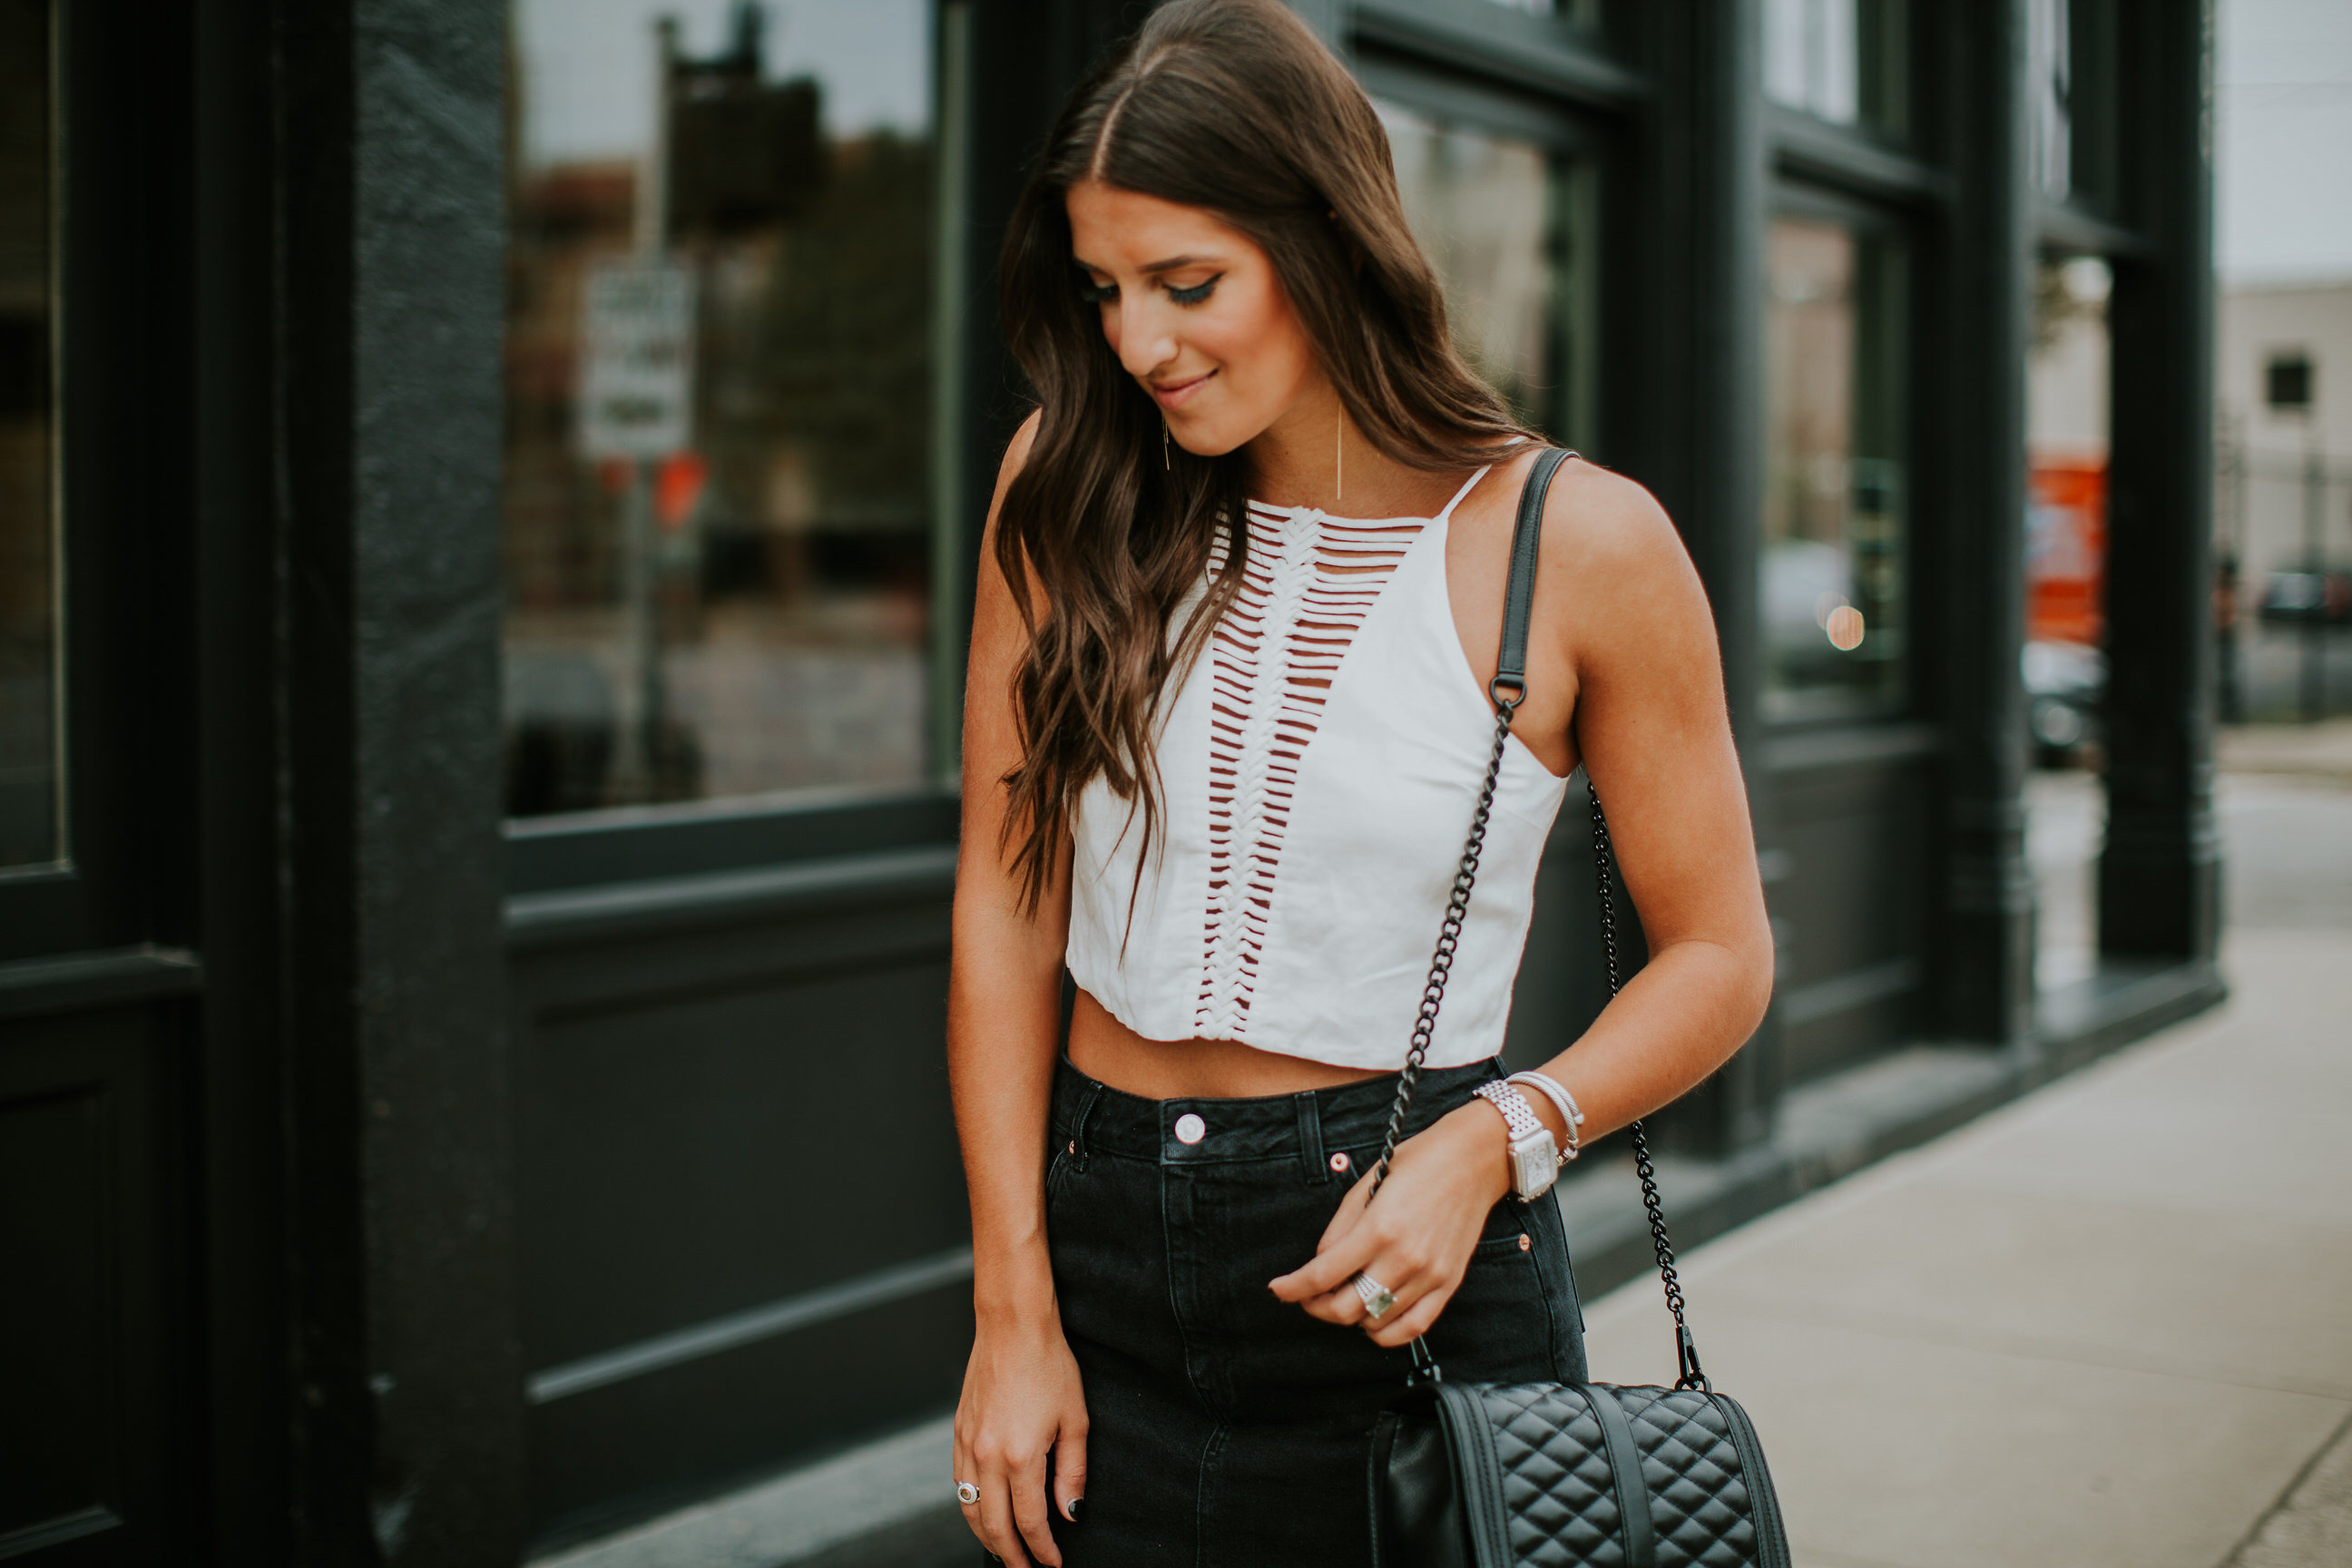 everyday denim skirt, dolce vita lena top, levis denim skirt, levis skirt, rebecca minkoff love crossbody, casual style, casual fashion, summer style, transitional outfit, levis jeans // grace wainwright a southern drawl